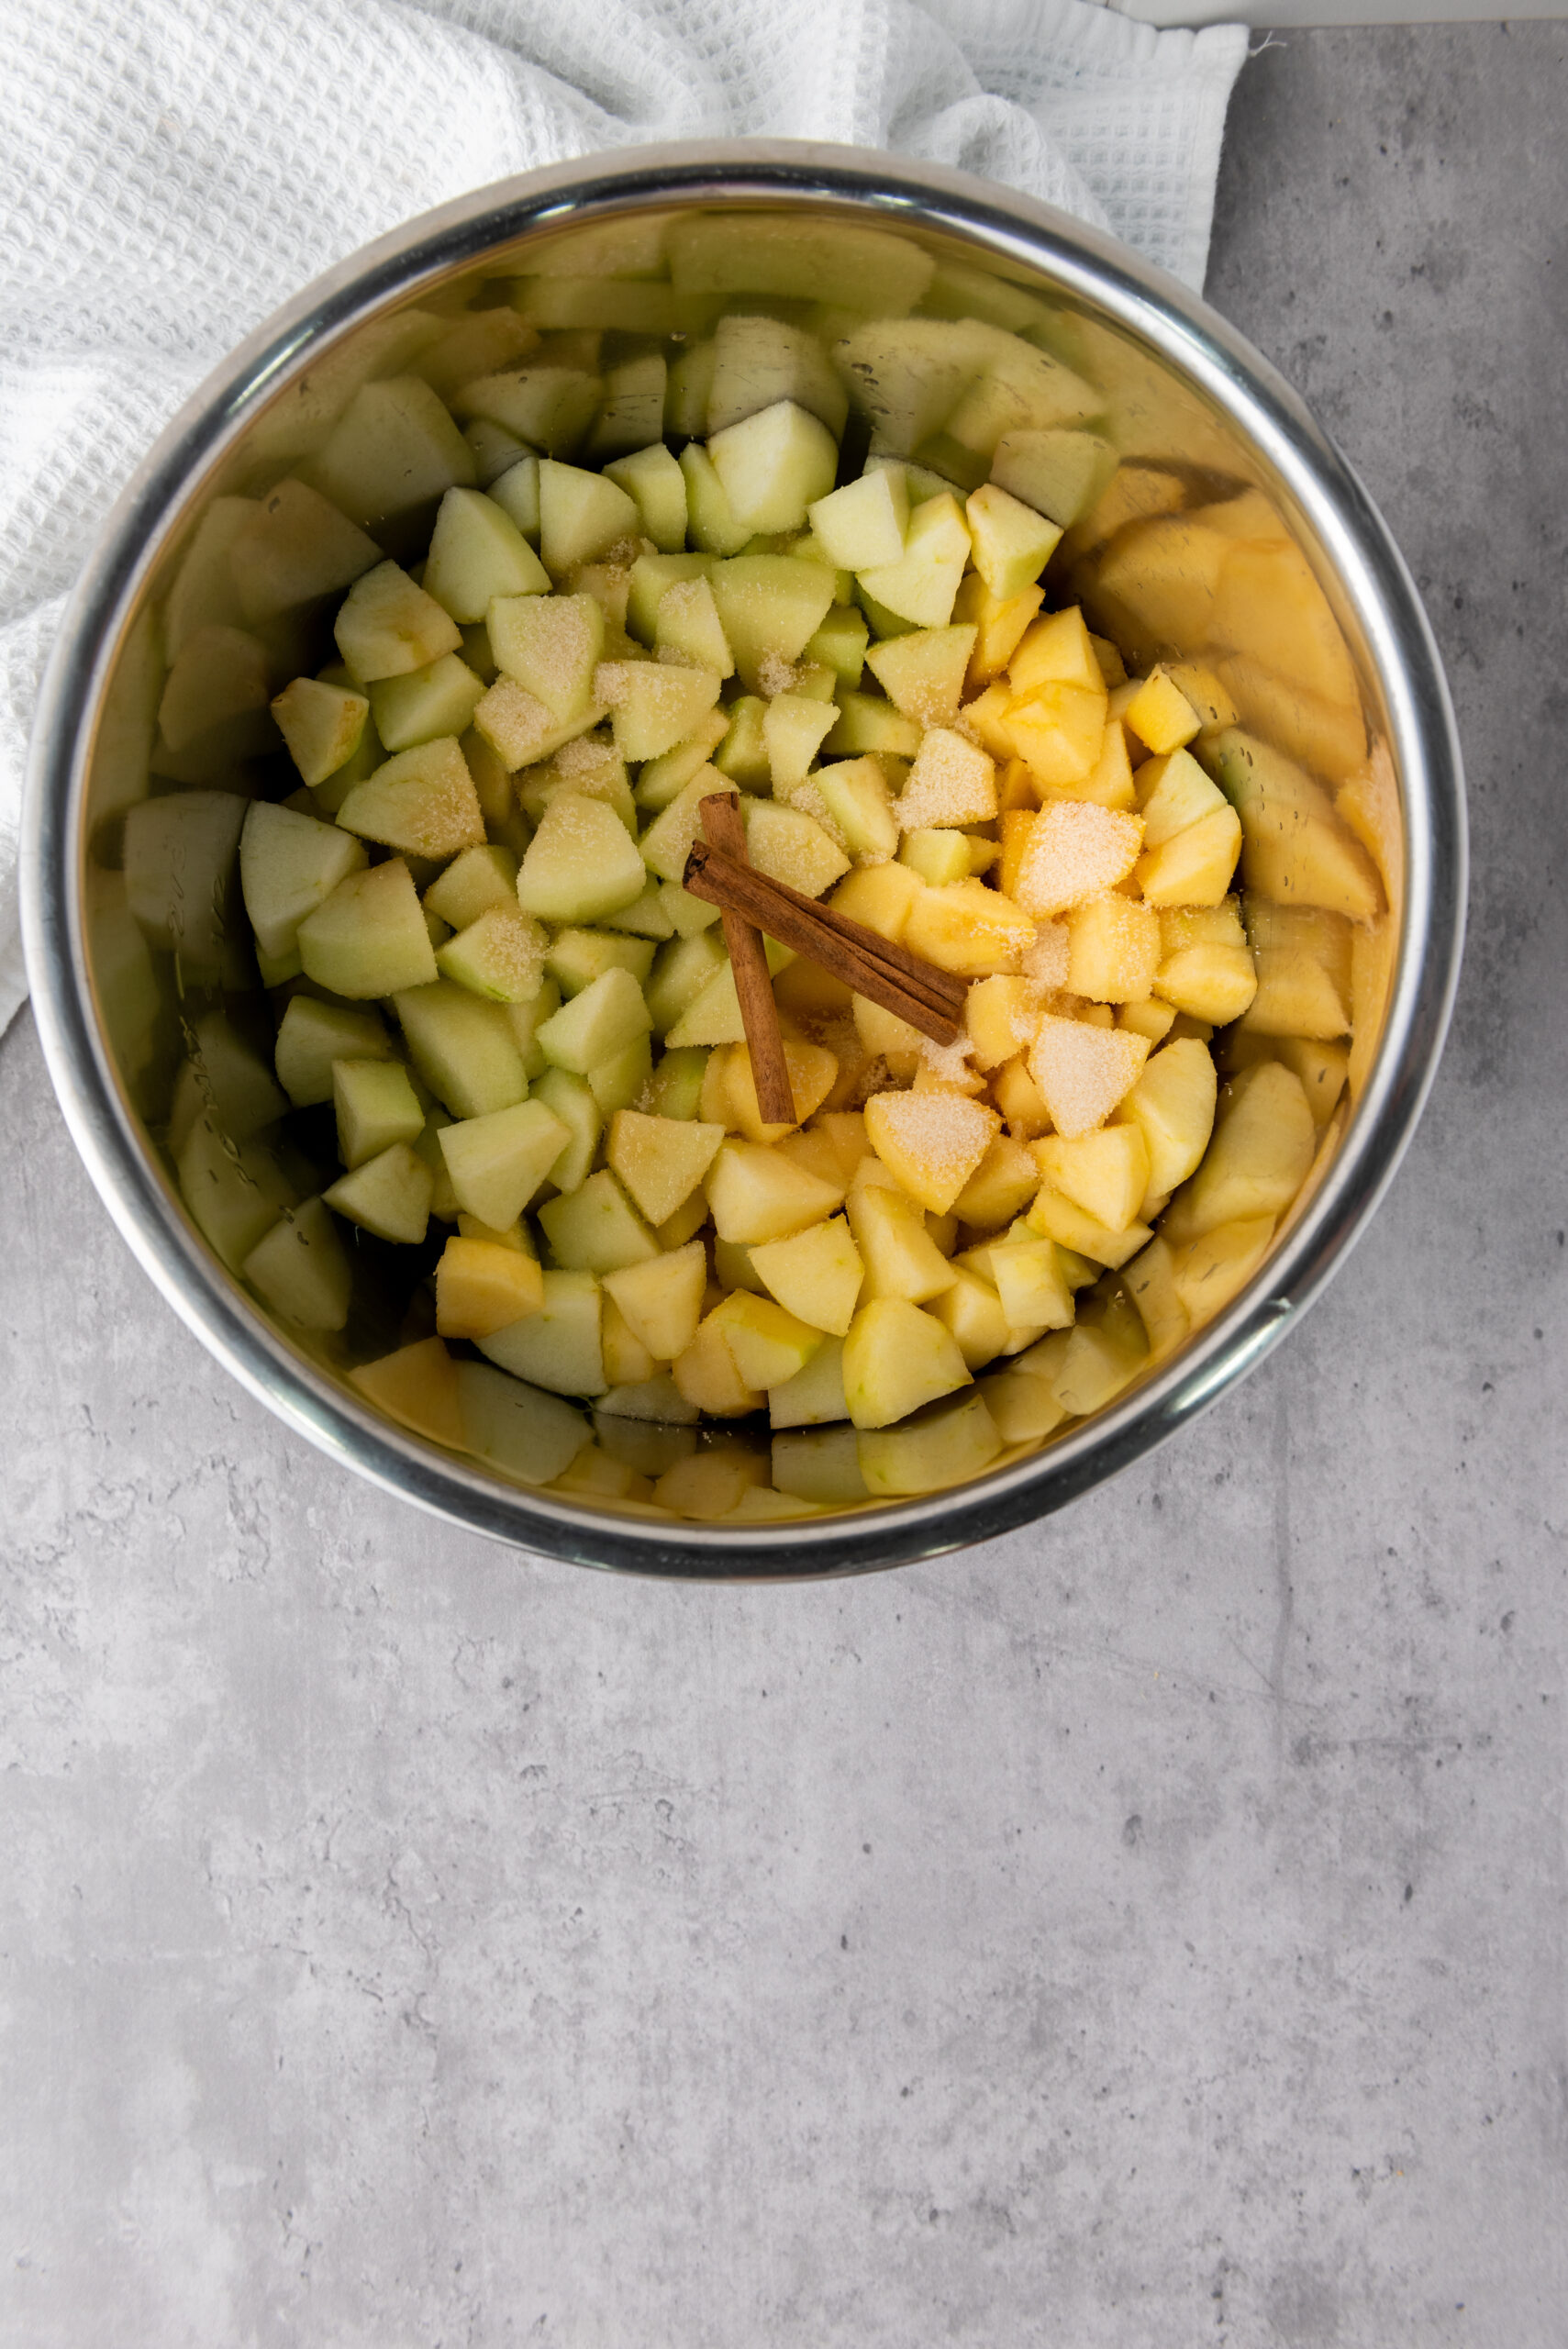 Apples peeled in the instant pot